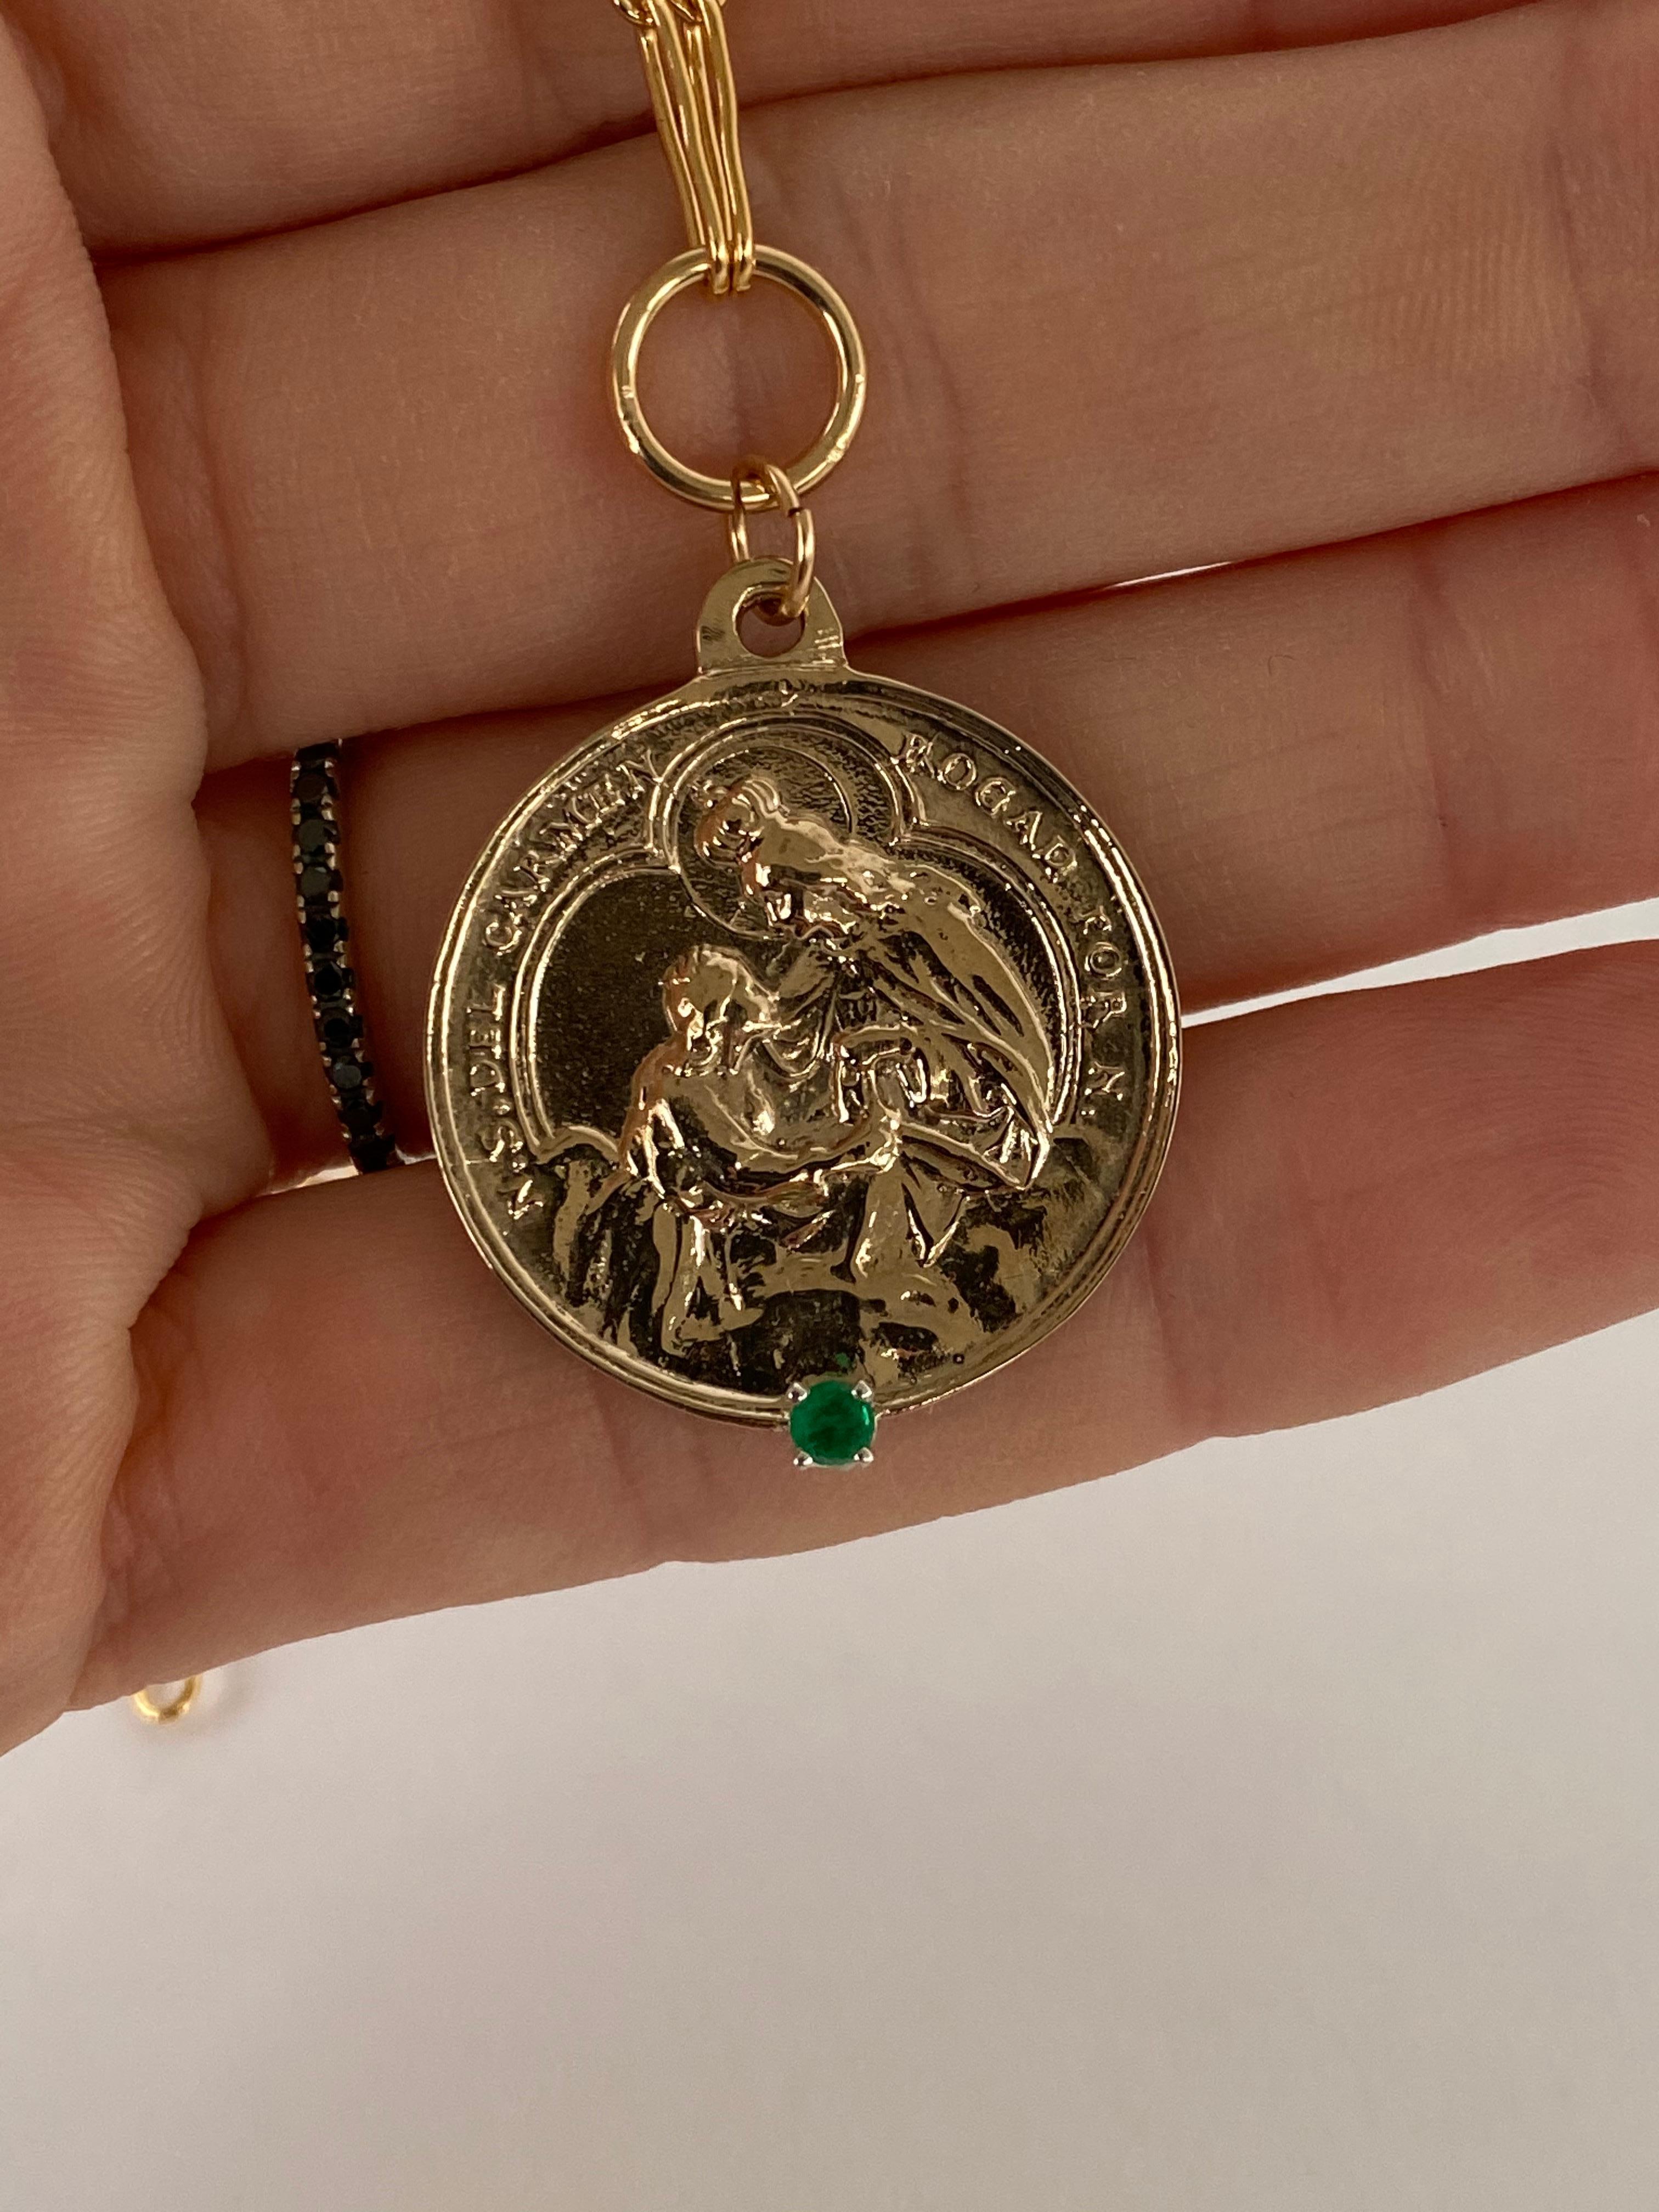 Emerald set in Prong on a Virgin Mother Mary Medal Round Coin Pendant in Bronze with a Gold Filled Chain Necklace J Dauphin

The Chain is 28' long but can be made shorter or longer on request.

Symbols or medals can become a powerful tool in our